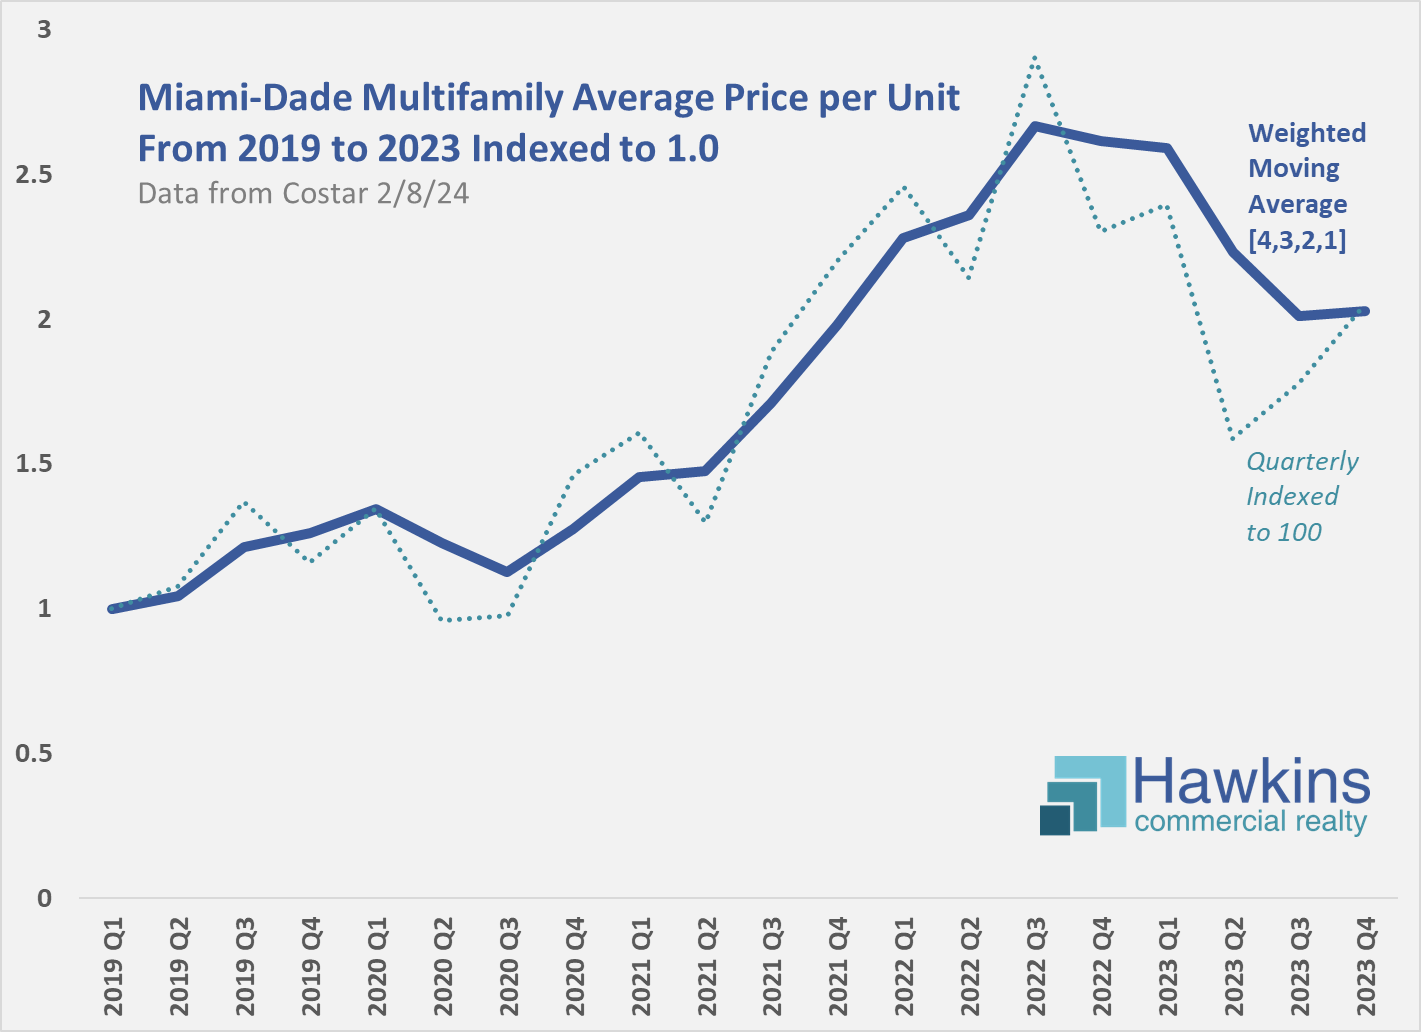 Chart Shows that Miami Multifamily Prices Appear to Have Declined Considerably as Well